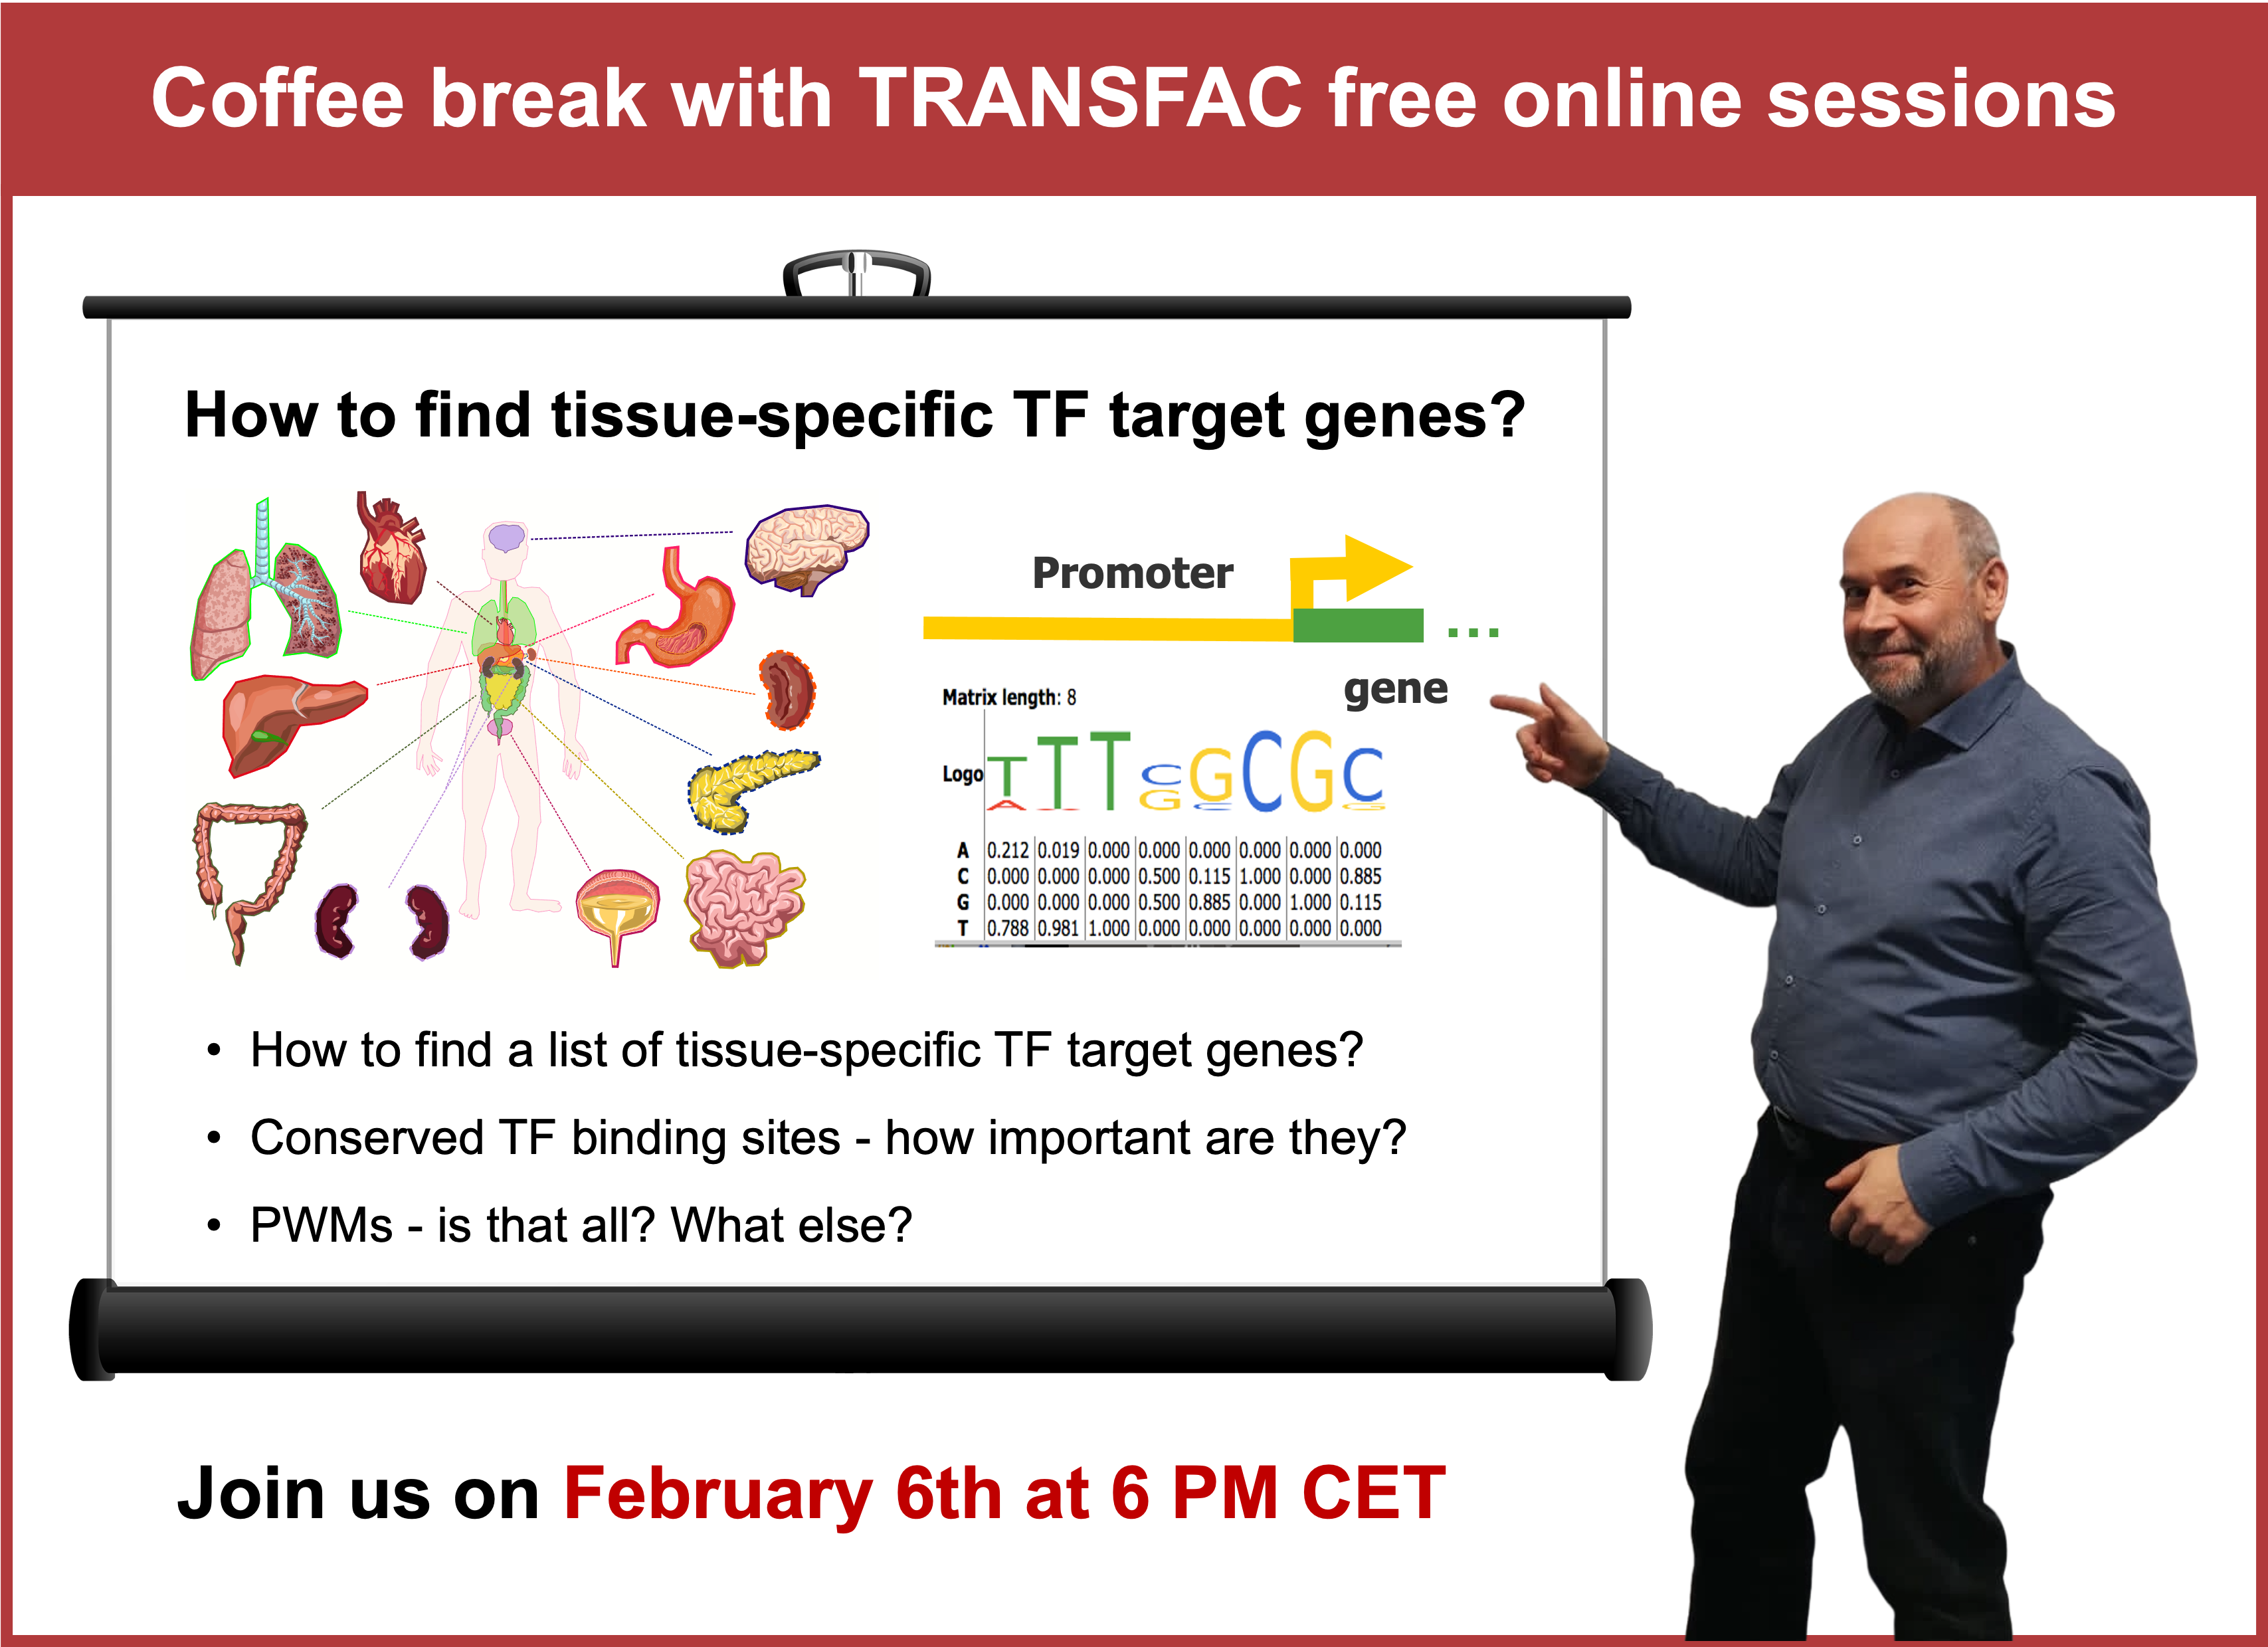 Coffee break with TRANSFAC on February 6th at 6 PM CET